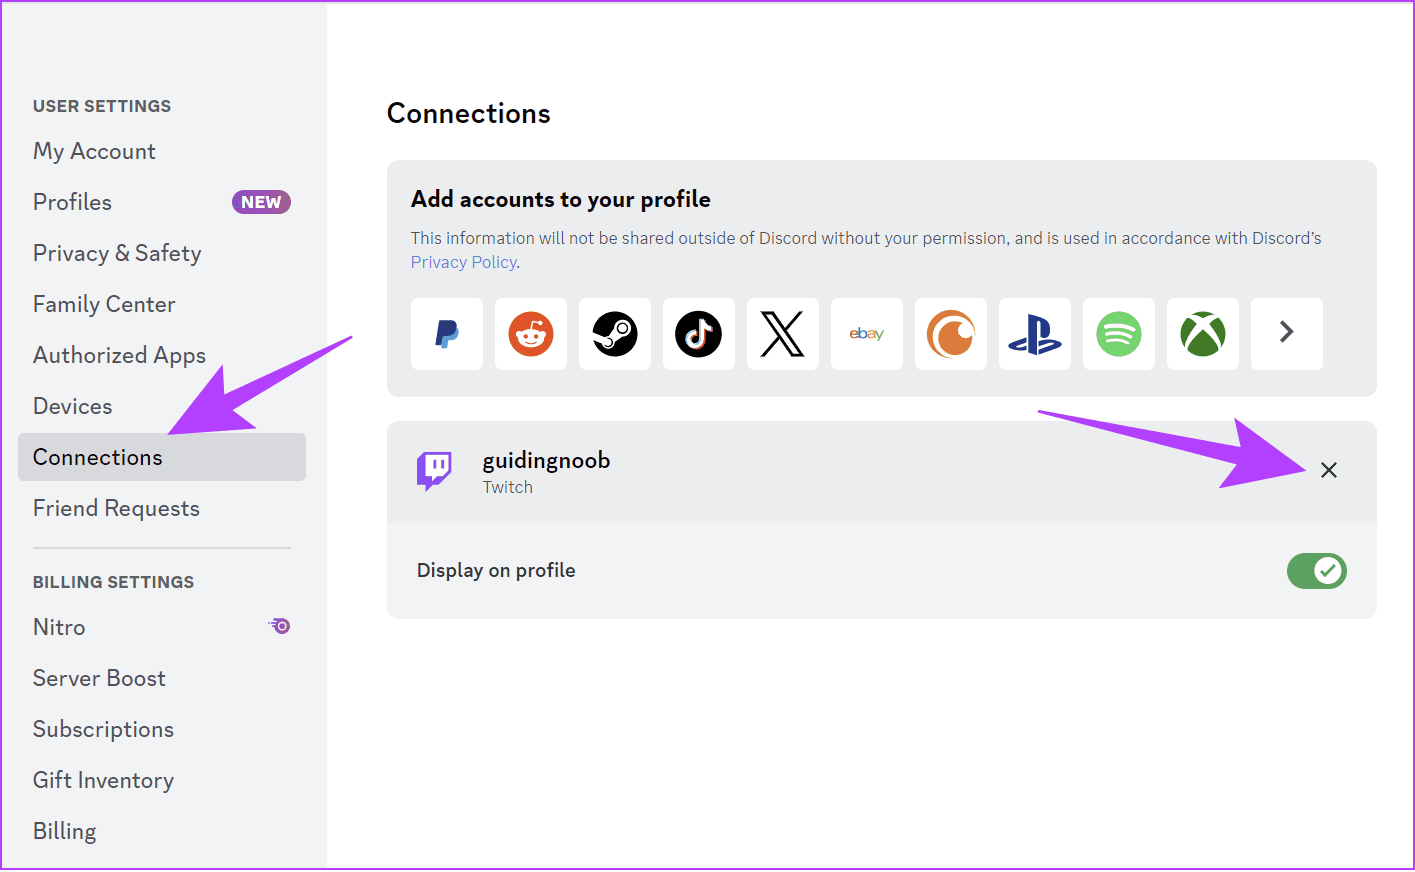 choose connections and click the X button next to Twitch